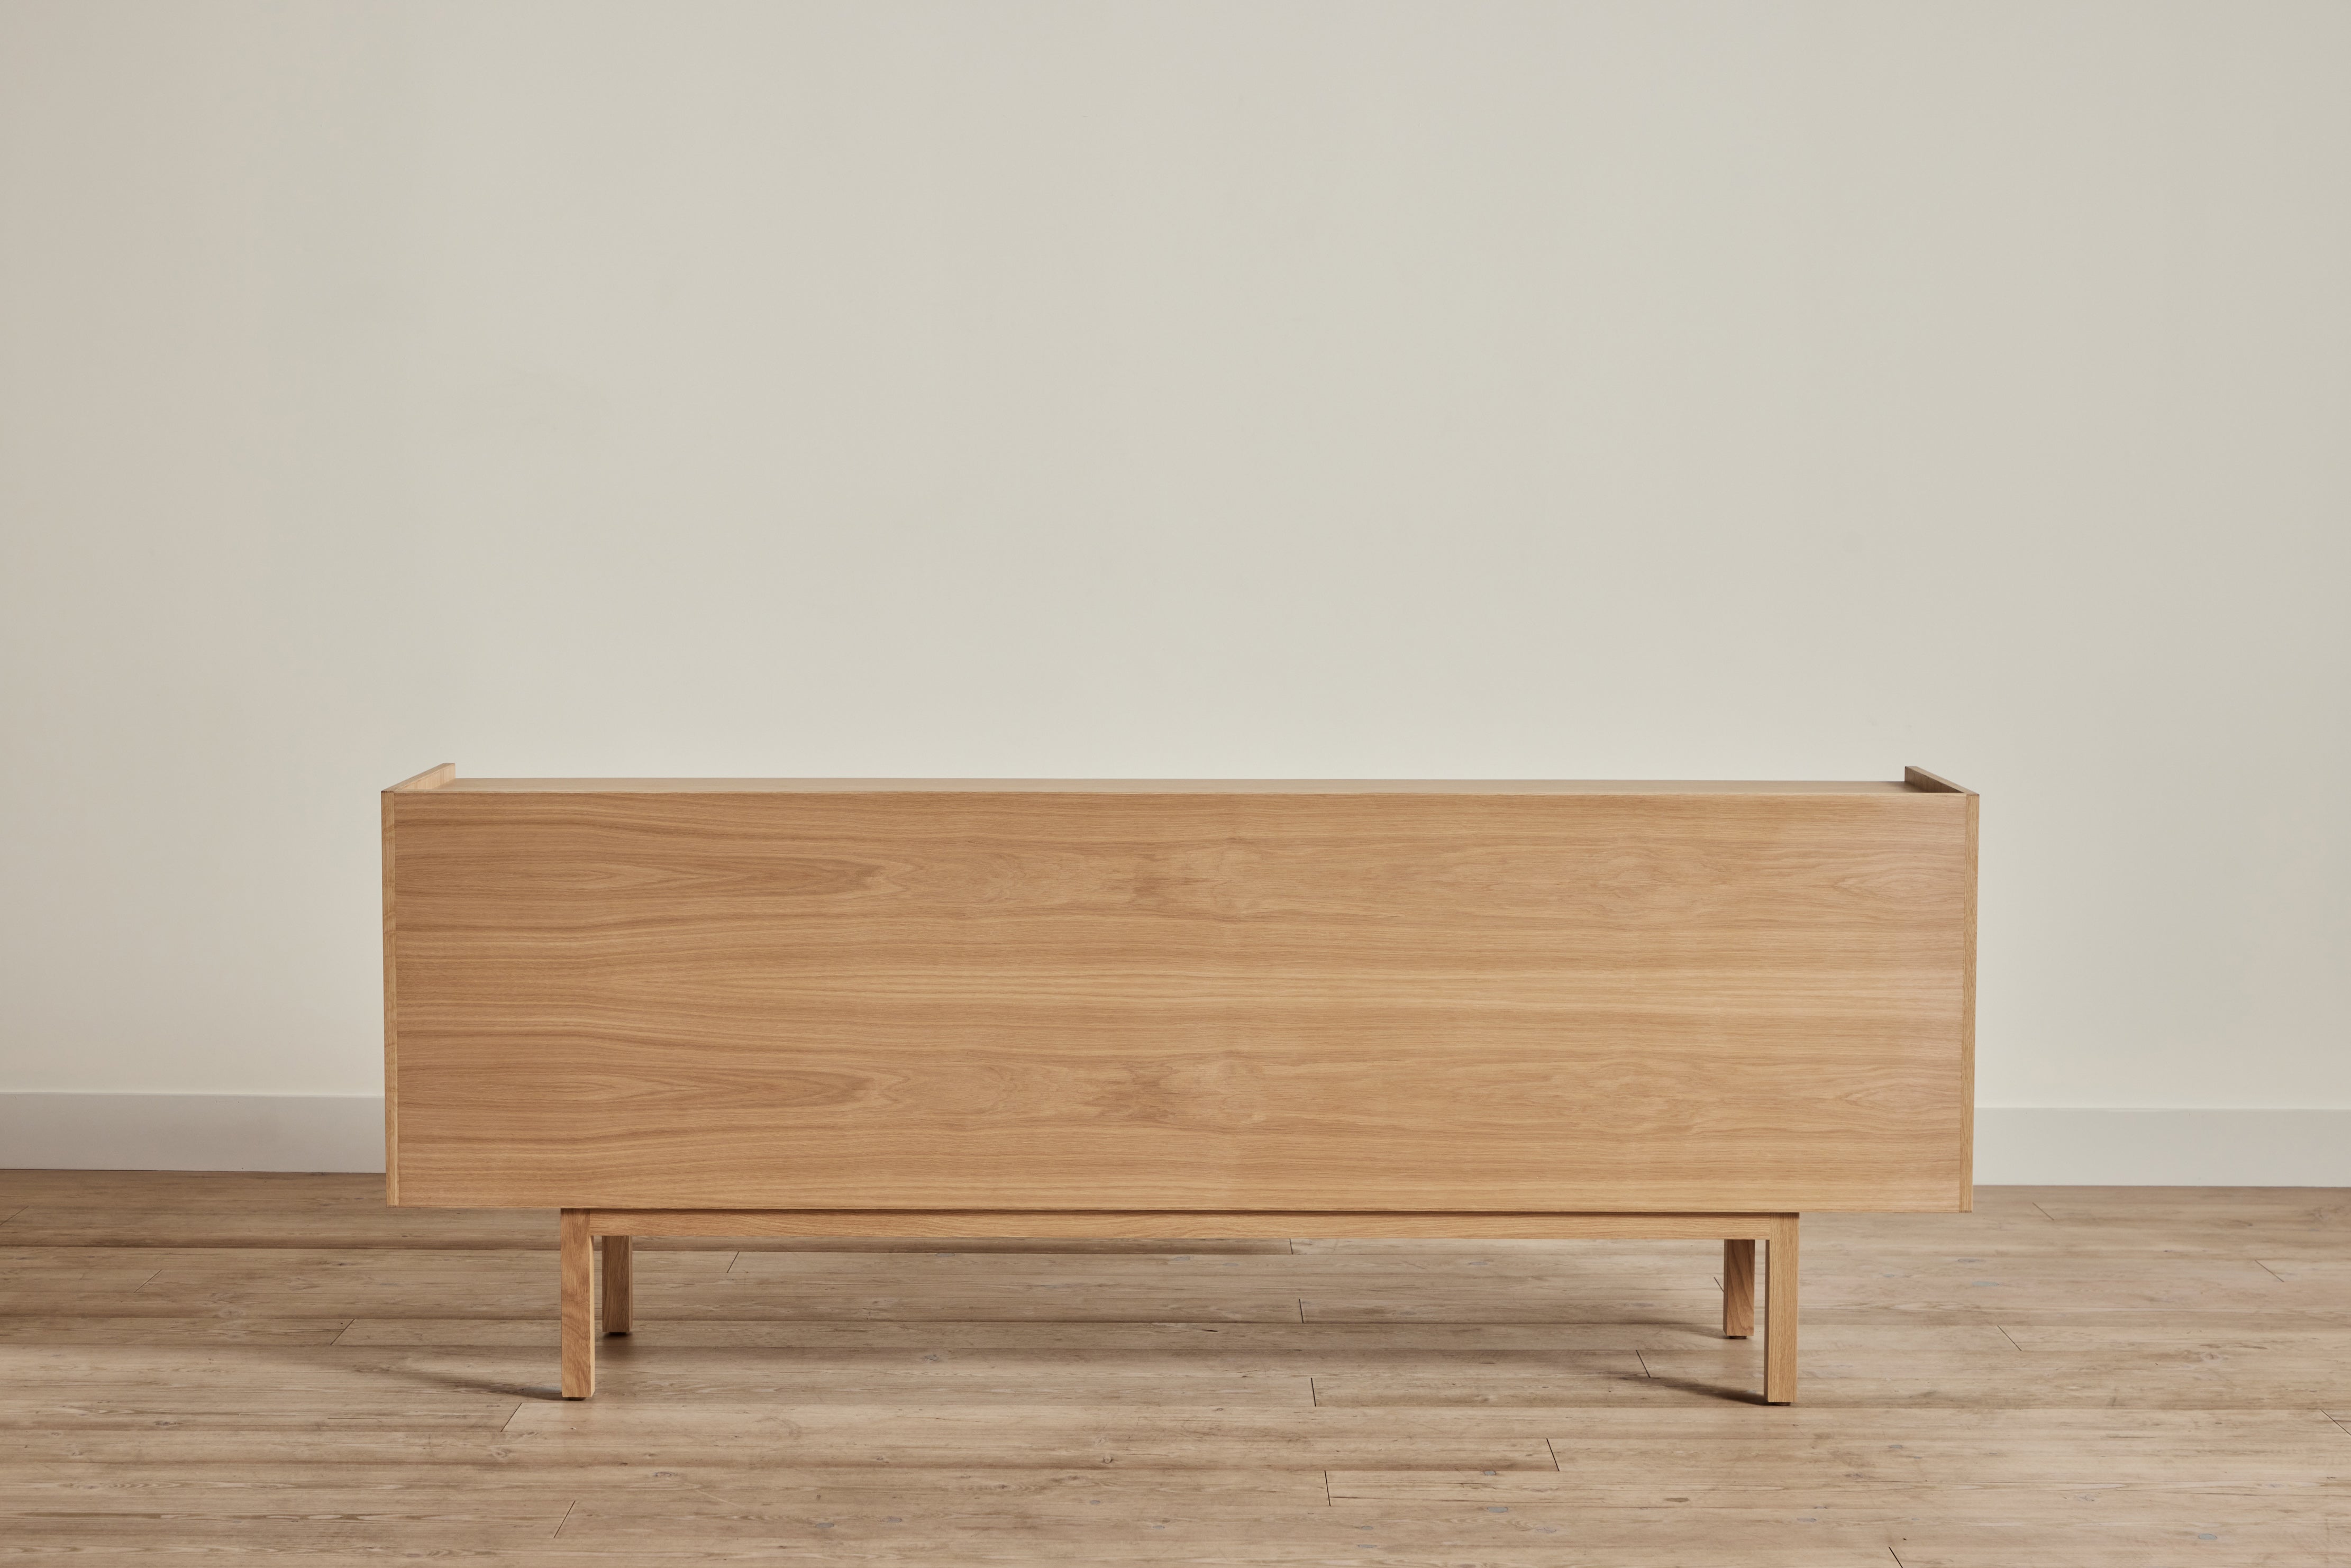 Nickey Kehoe Purist Credenza, 86.5" - In Stock